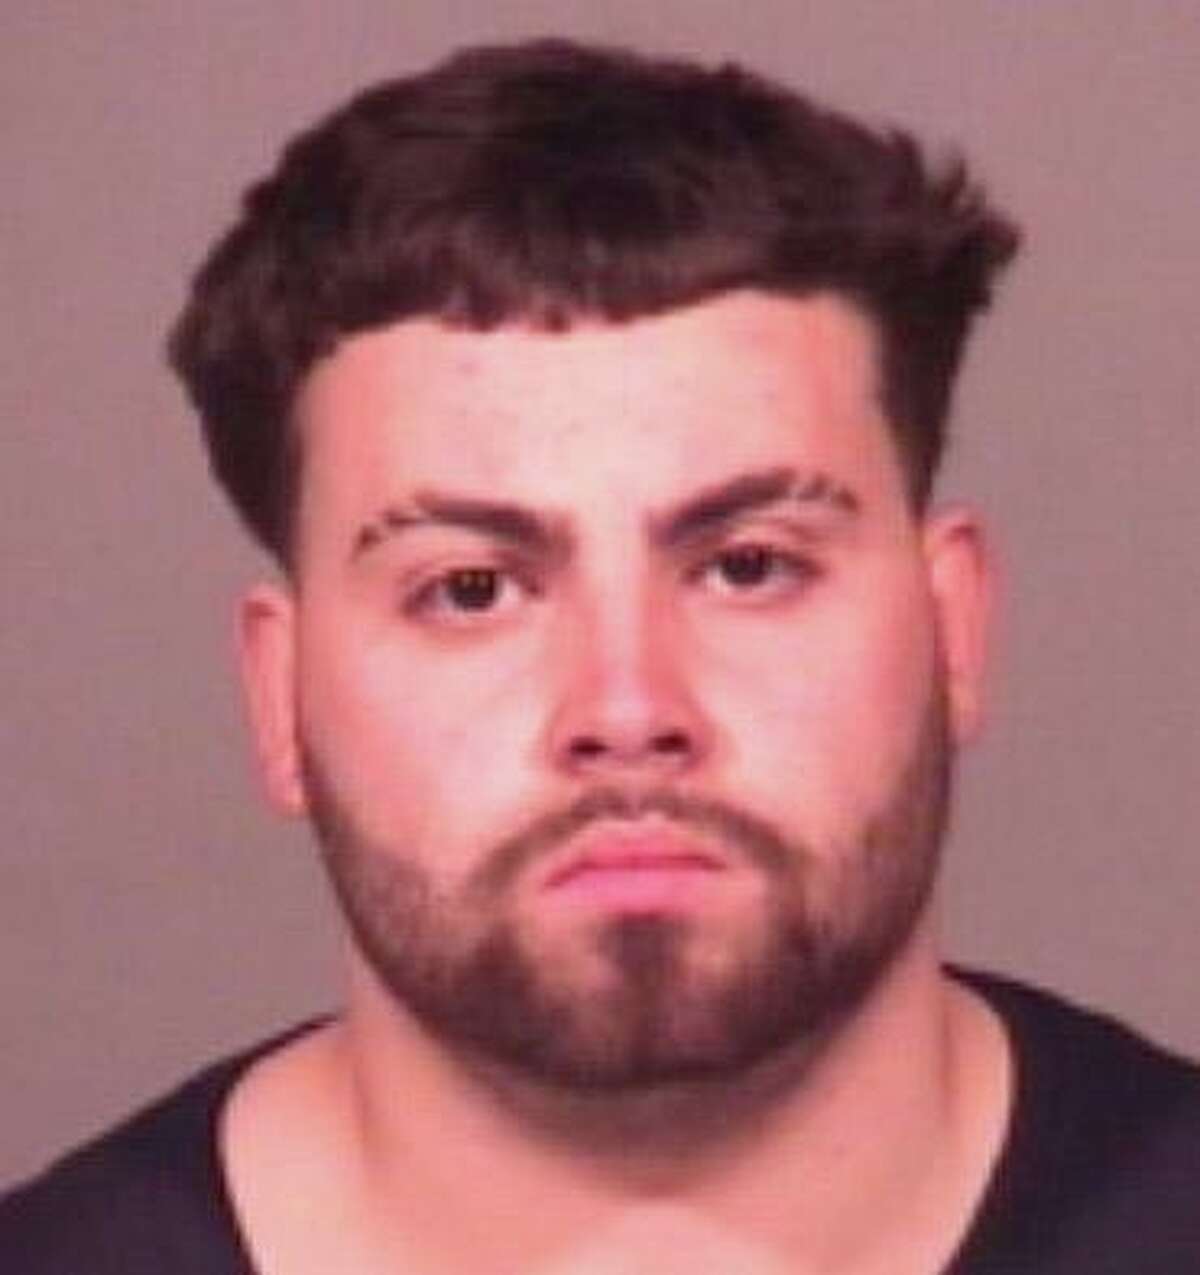 Miguel Acevedo, 18, of Union Street in Meriden, Conn., was charged with interfering with police. His bond was set at $10,000.